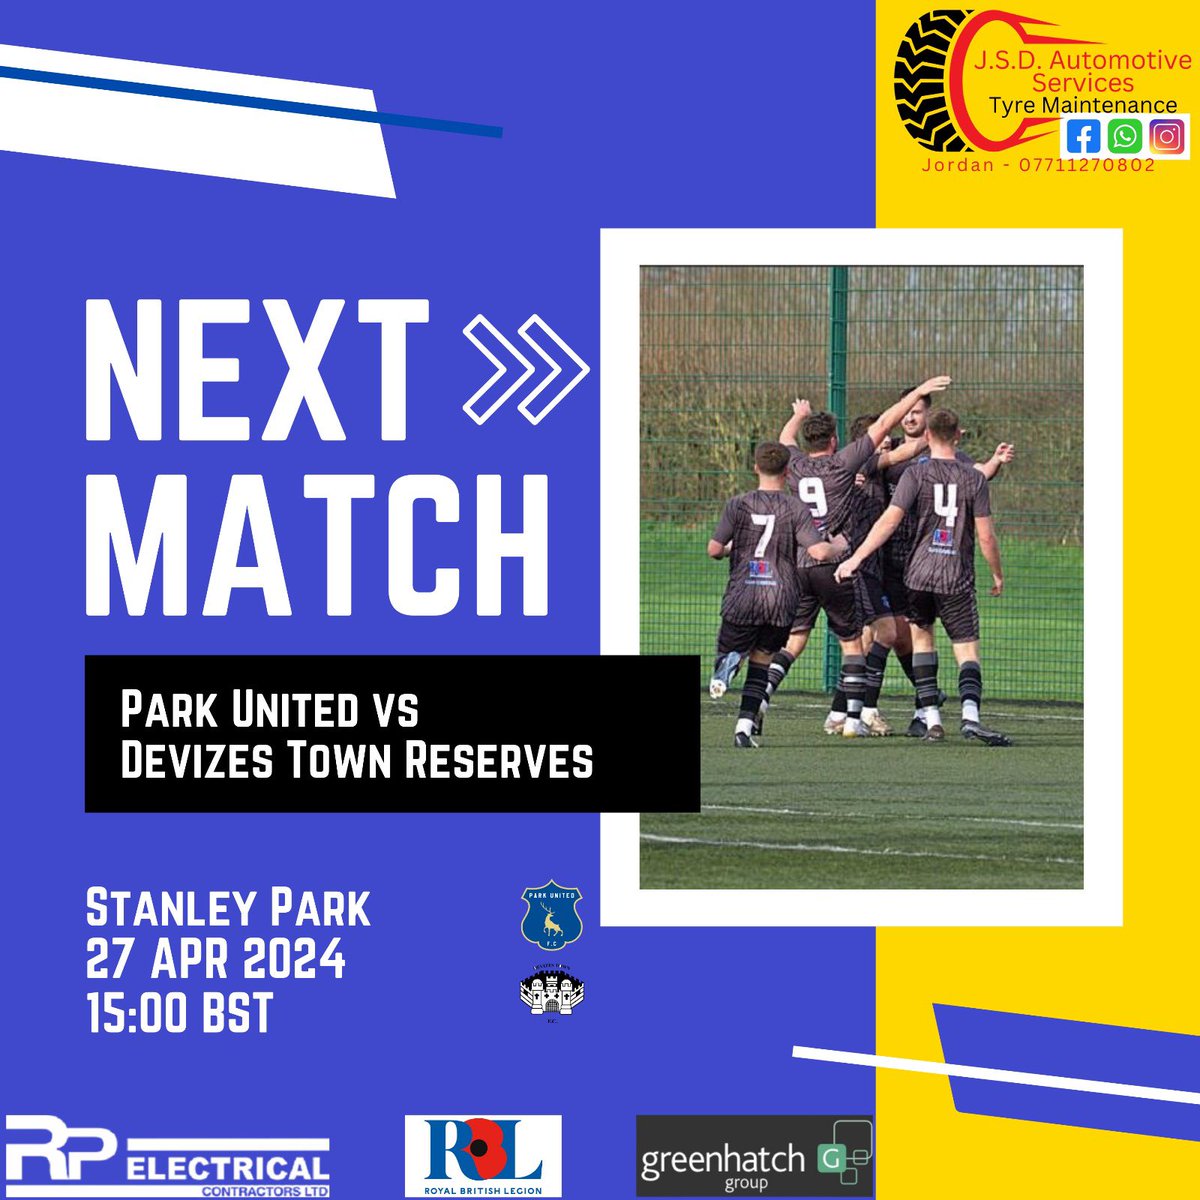 GAME DAY!! Huge game for the boys today as we welcome a very good @DevReservesFC team to Stanley Park. Please come along and support the lads in what will arguably be one of our toughest games to date. #Parklife #UTFP 🩶